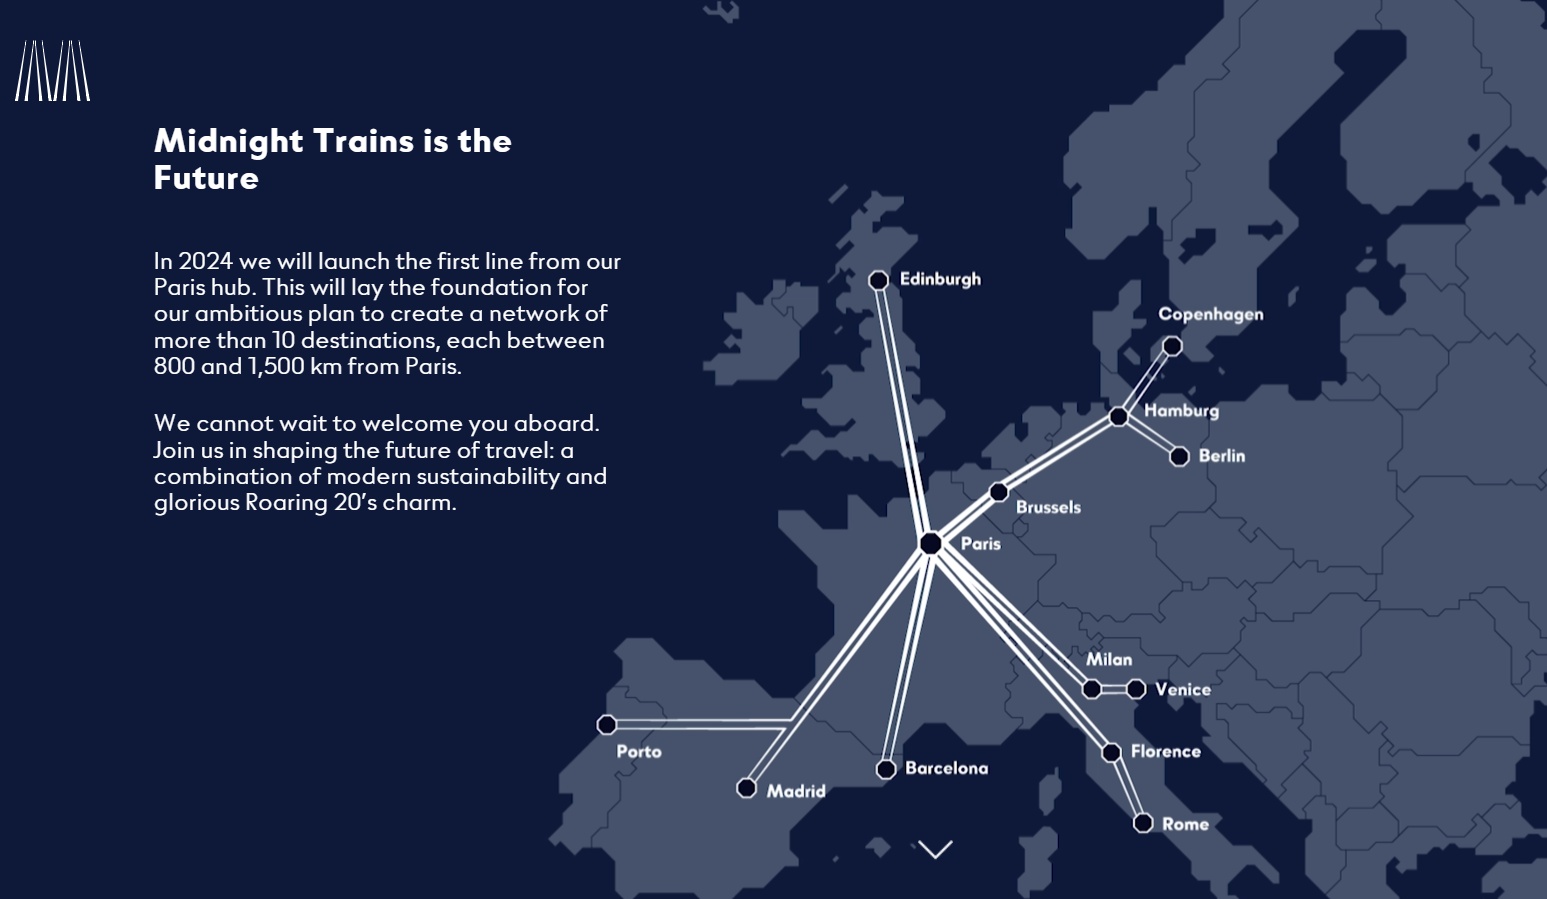 Click image for larger version  Name:	midnight trains.png Views:	0 Size:	315,7 kB ID:	2053223